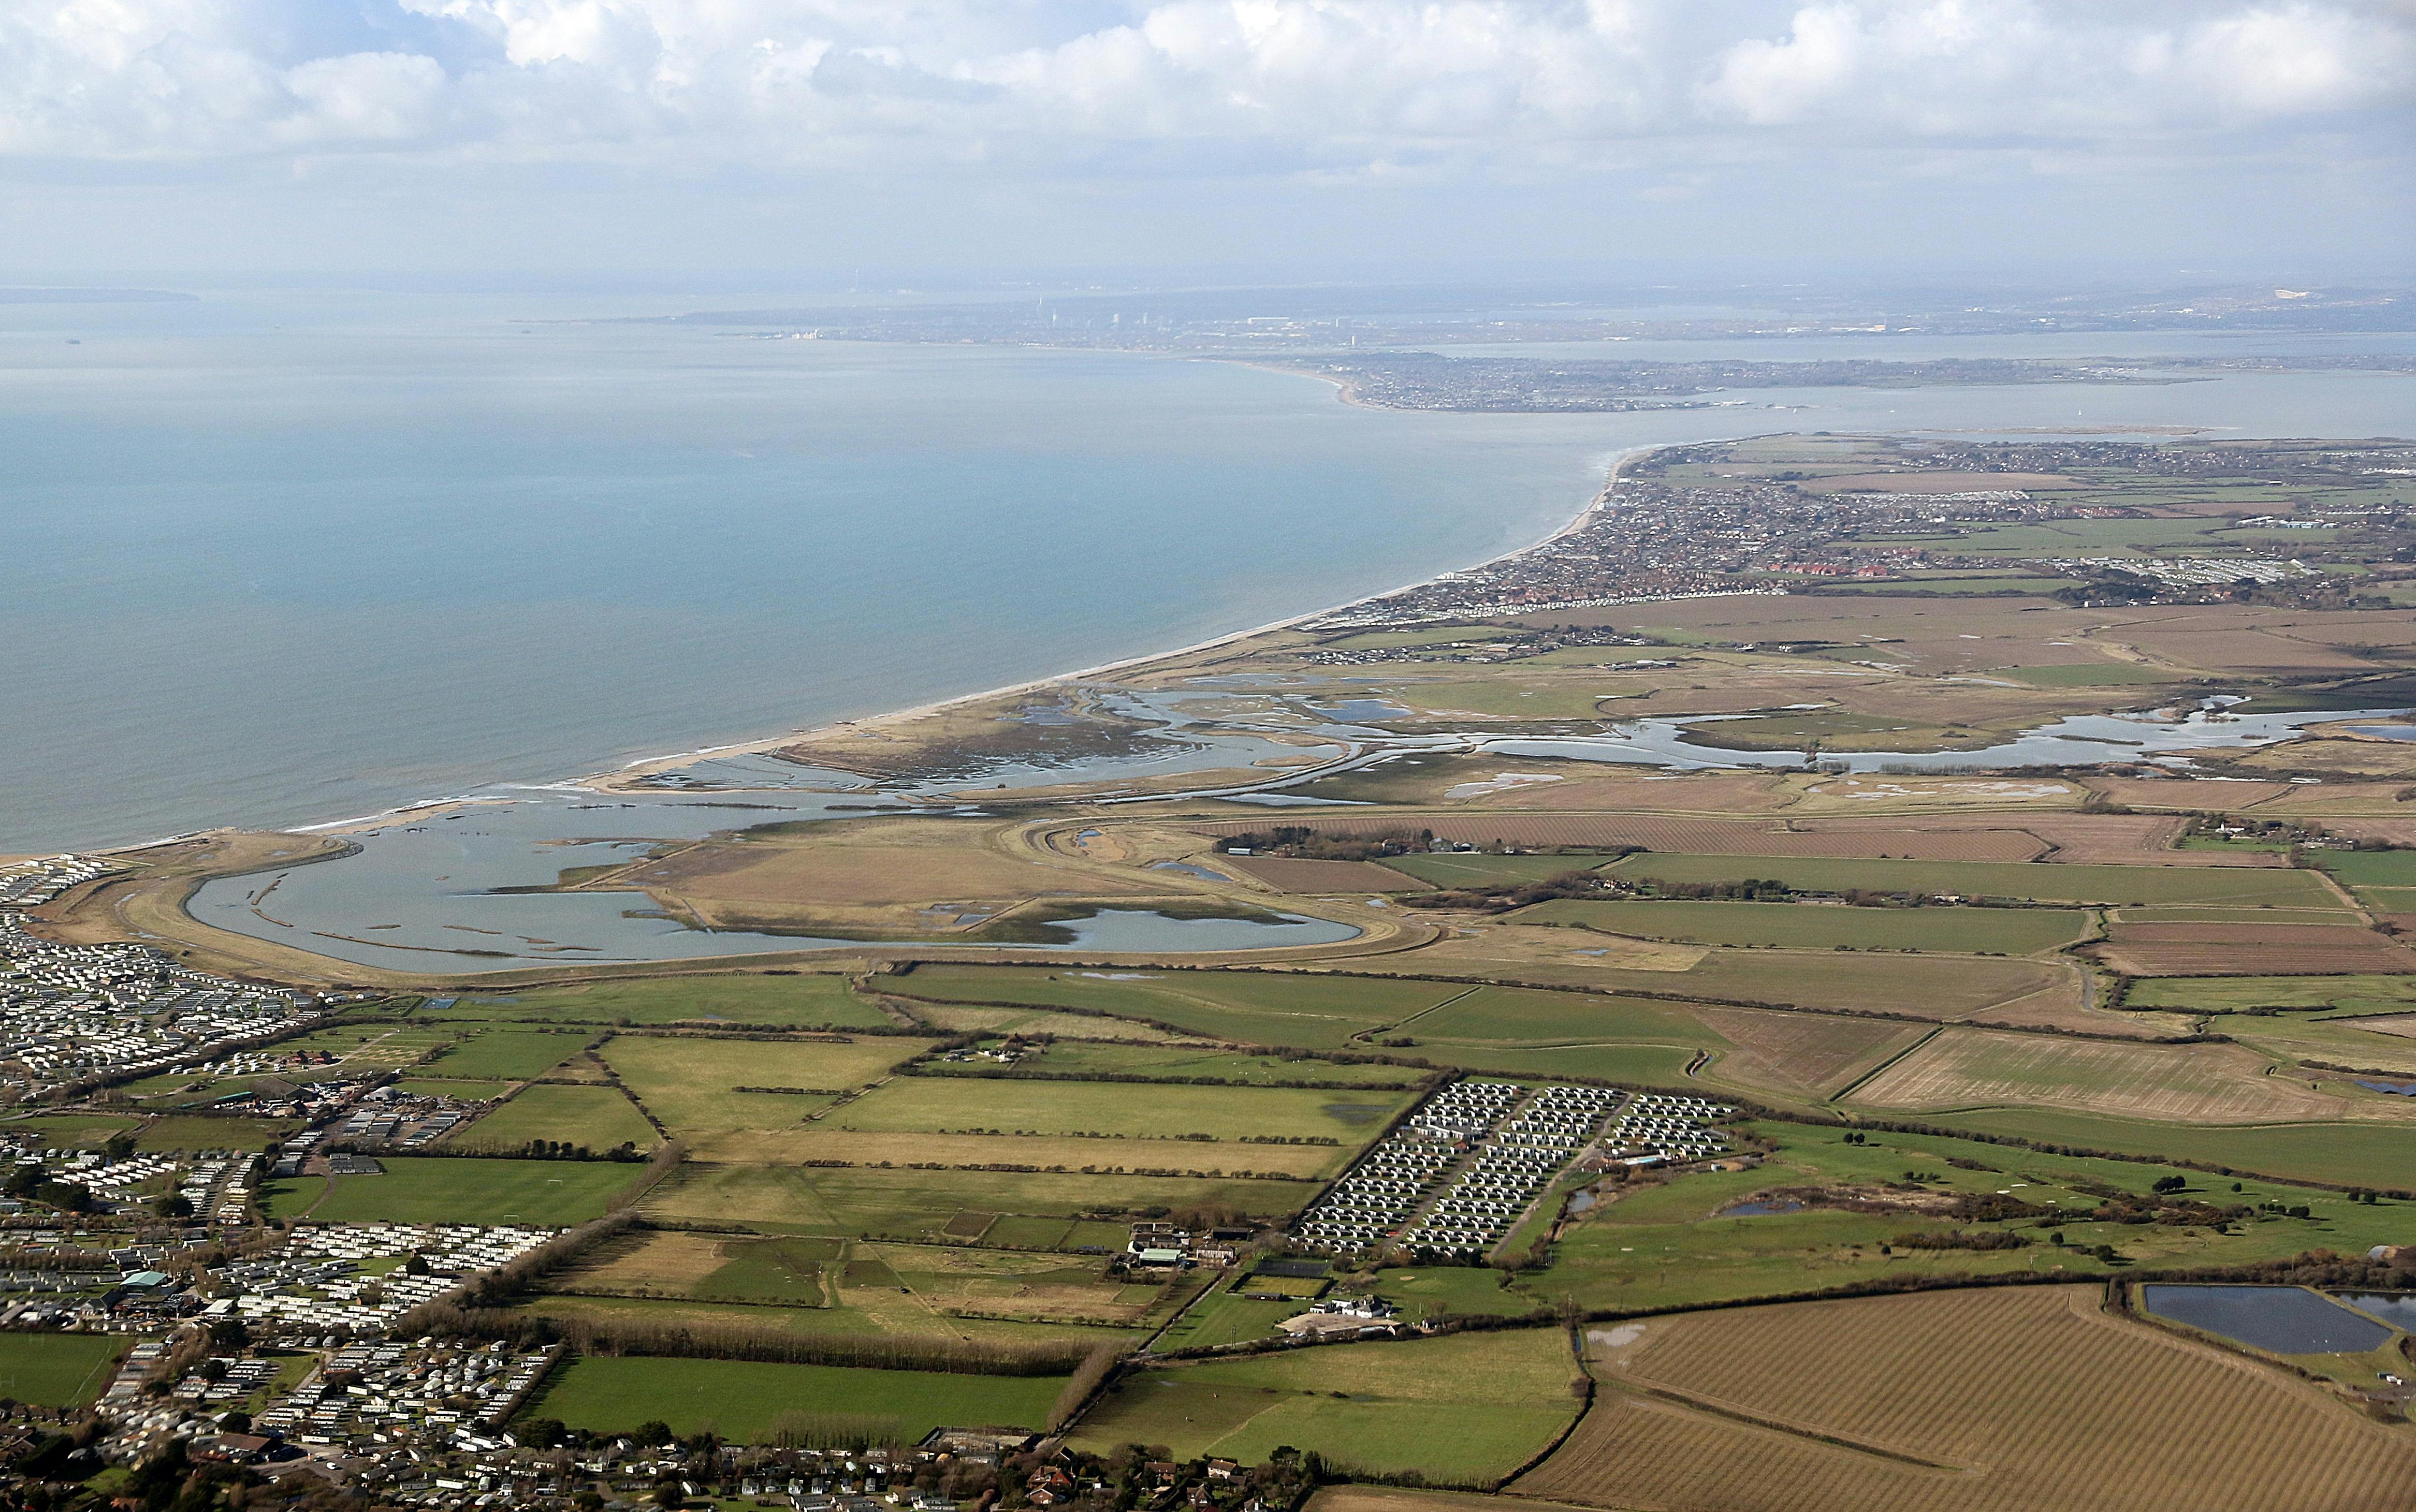 Ariel view image of the Medmerry Realignment area